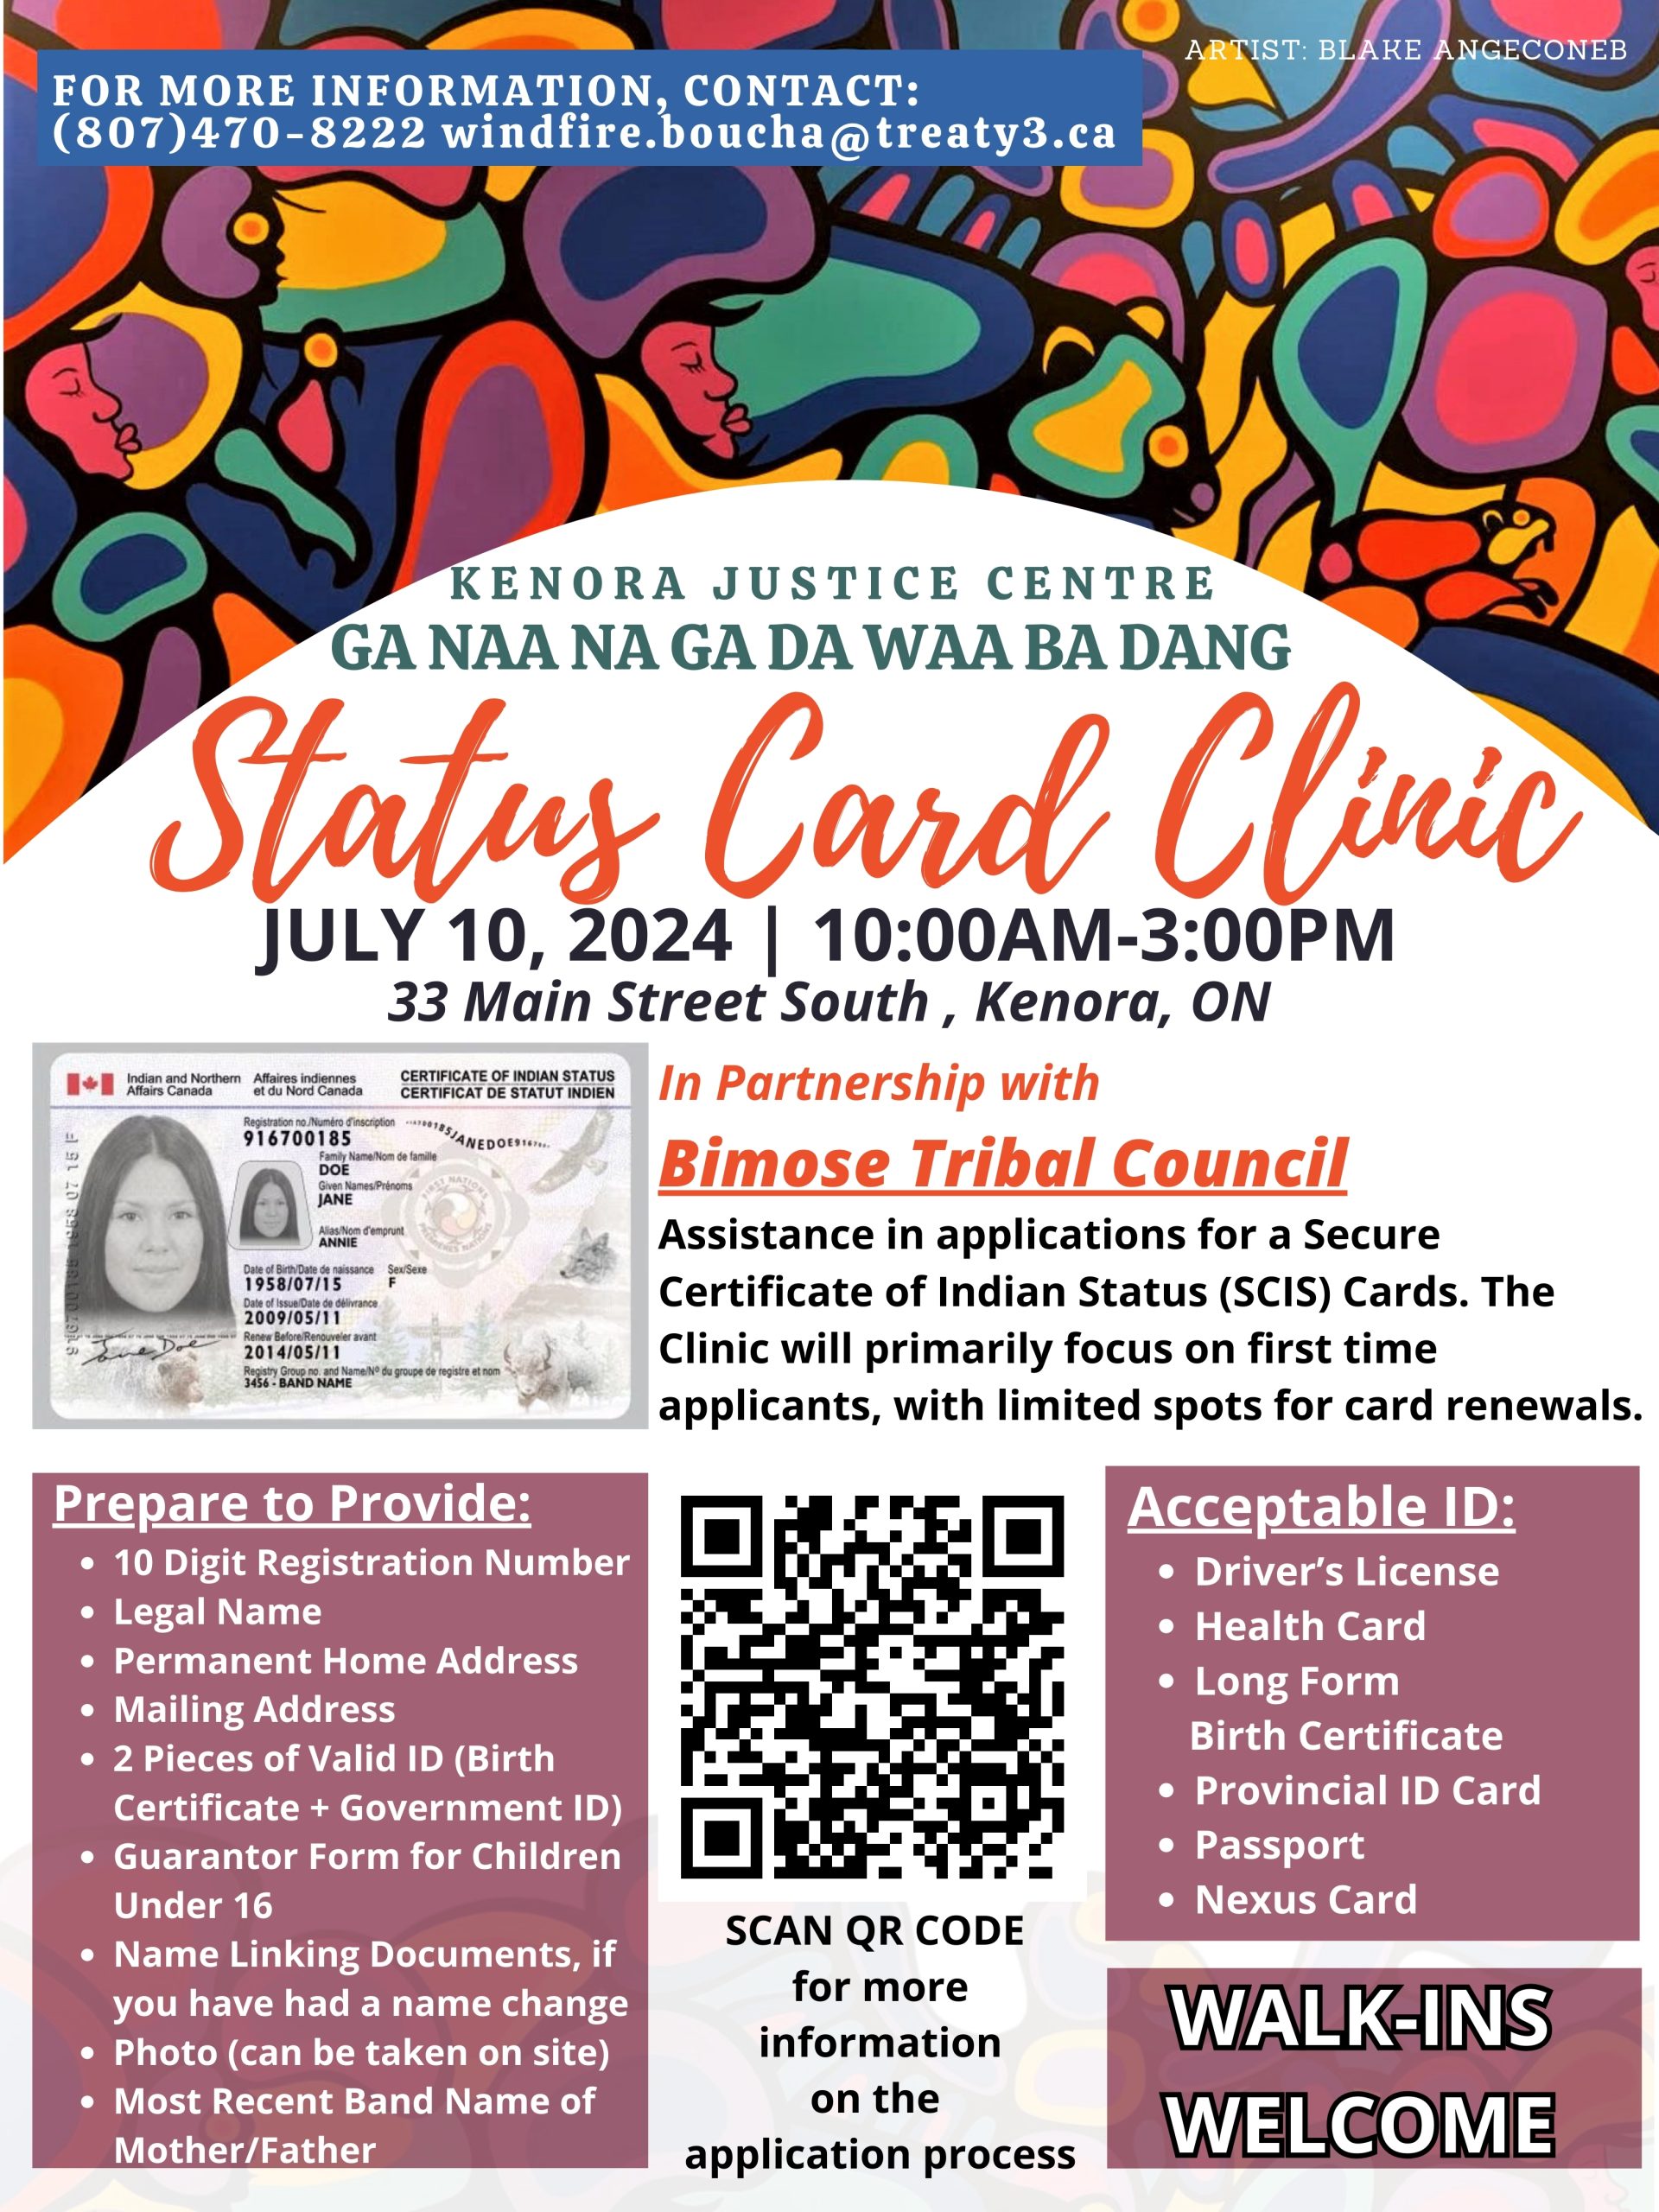 Status Card Clinic at Kenora Justice Centre